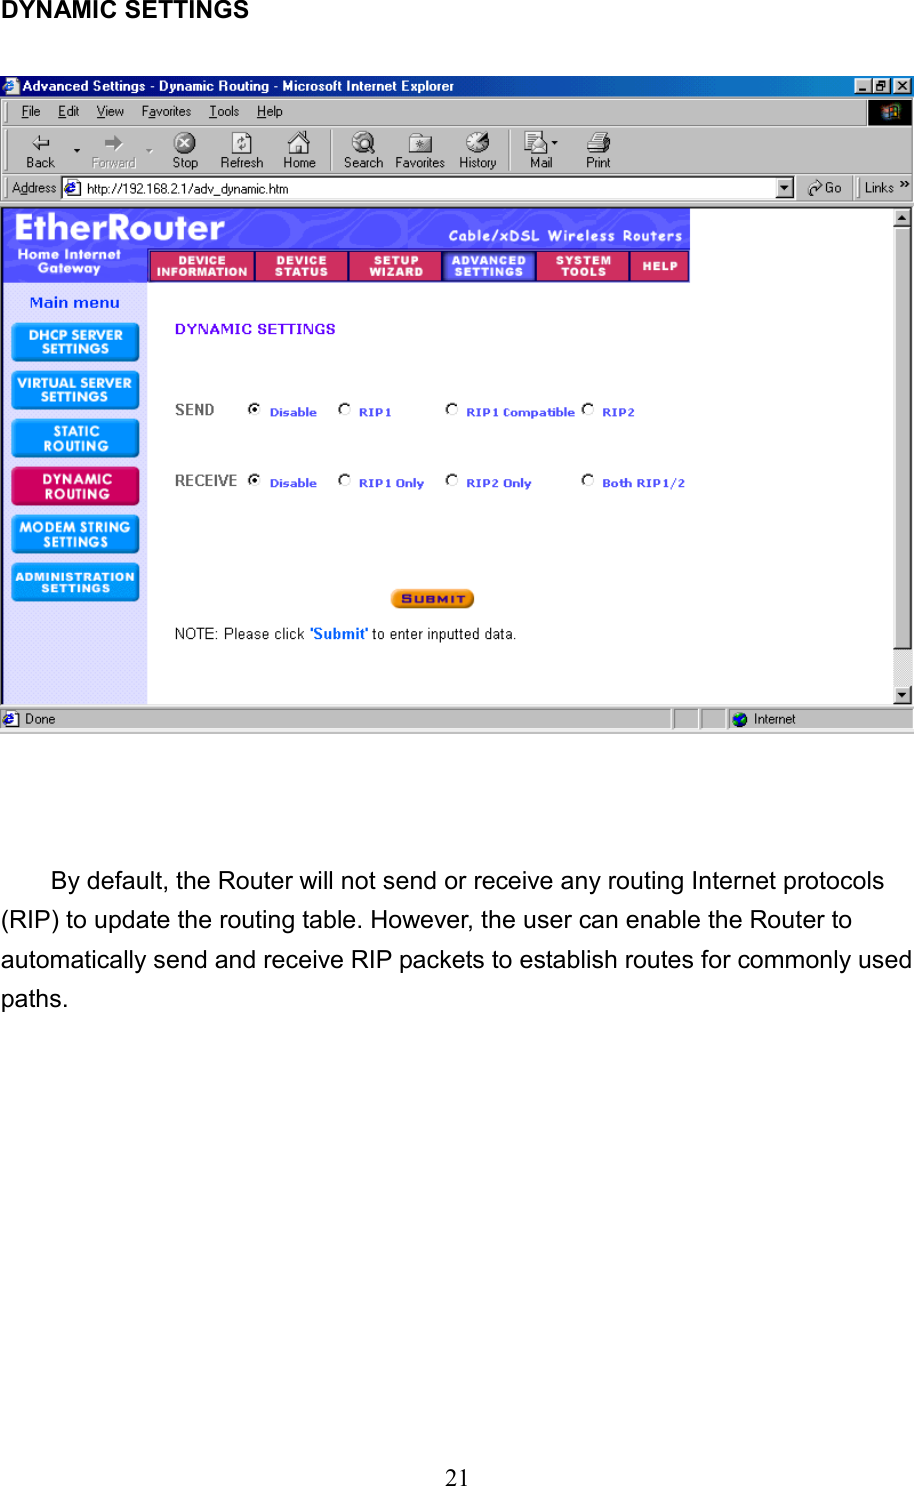  21 DYNAMIC SETTINGS       By default, the Router will not send or receive any routing Internet protocols (RIP) to update the routing table. However, the user can enable the Router to automatically send and receive RIP packets to establish routes for commonly used paths.            